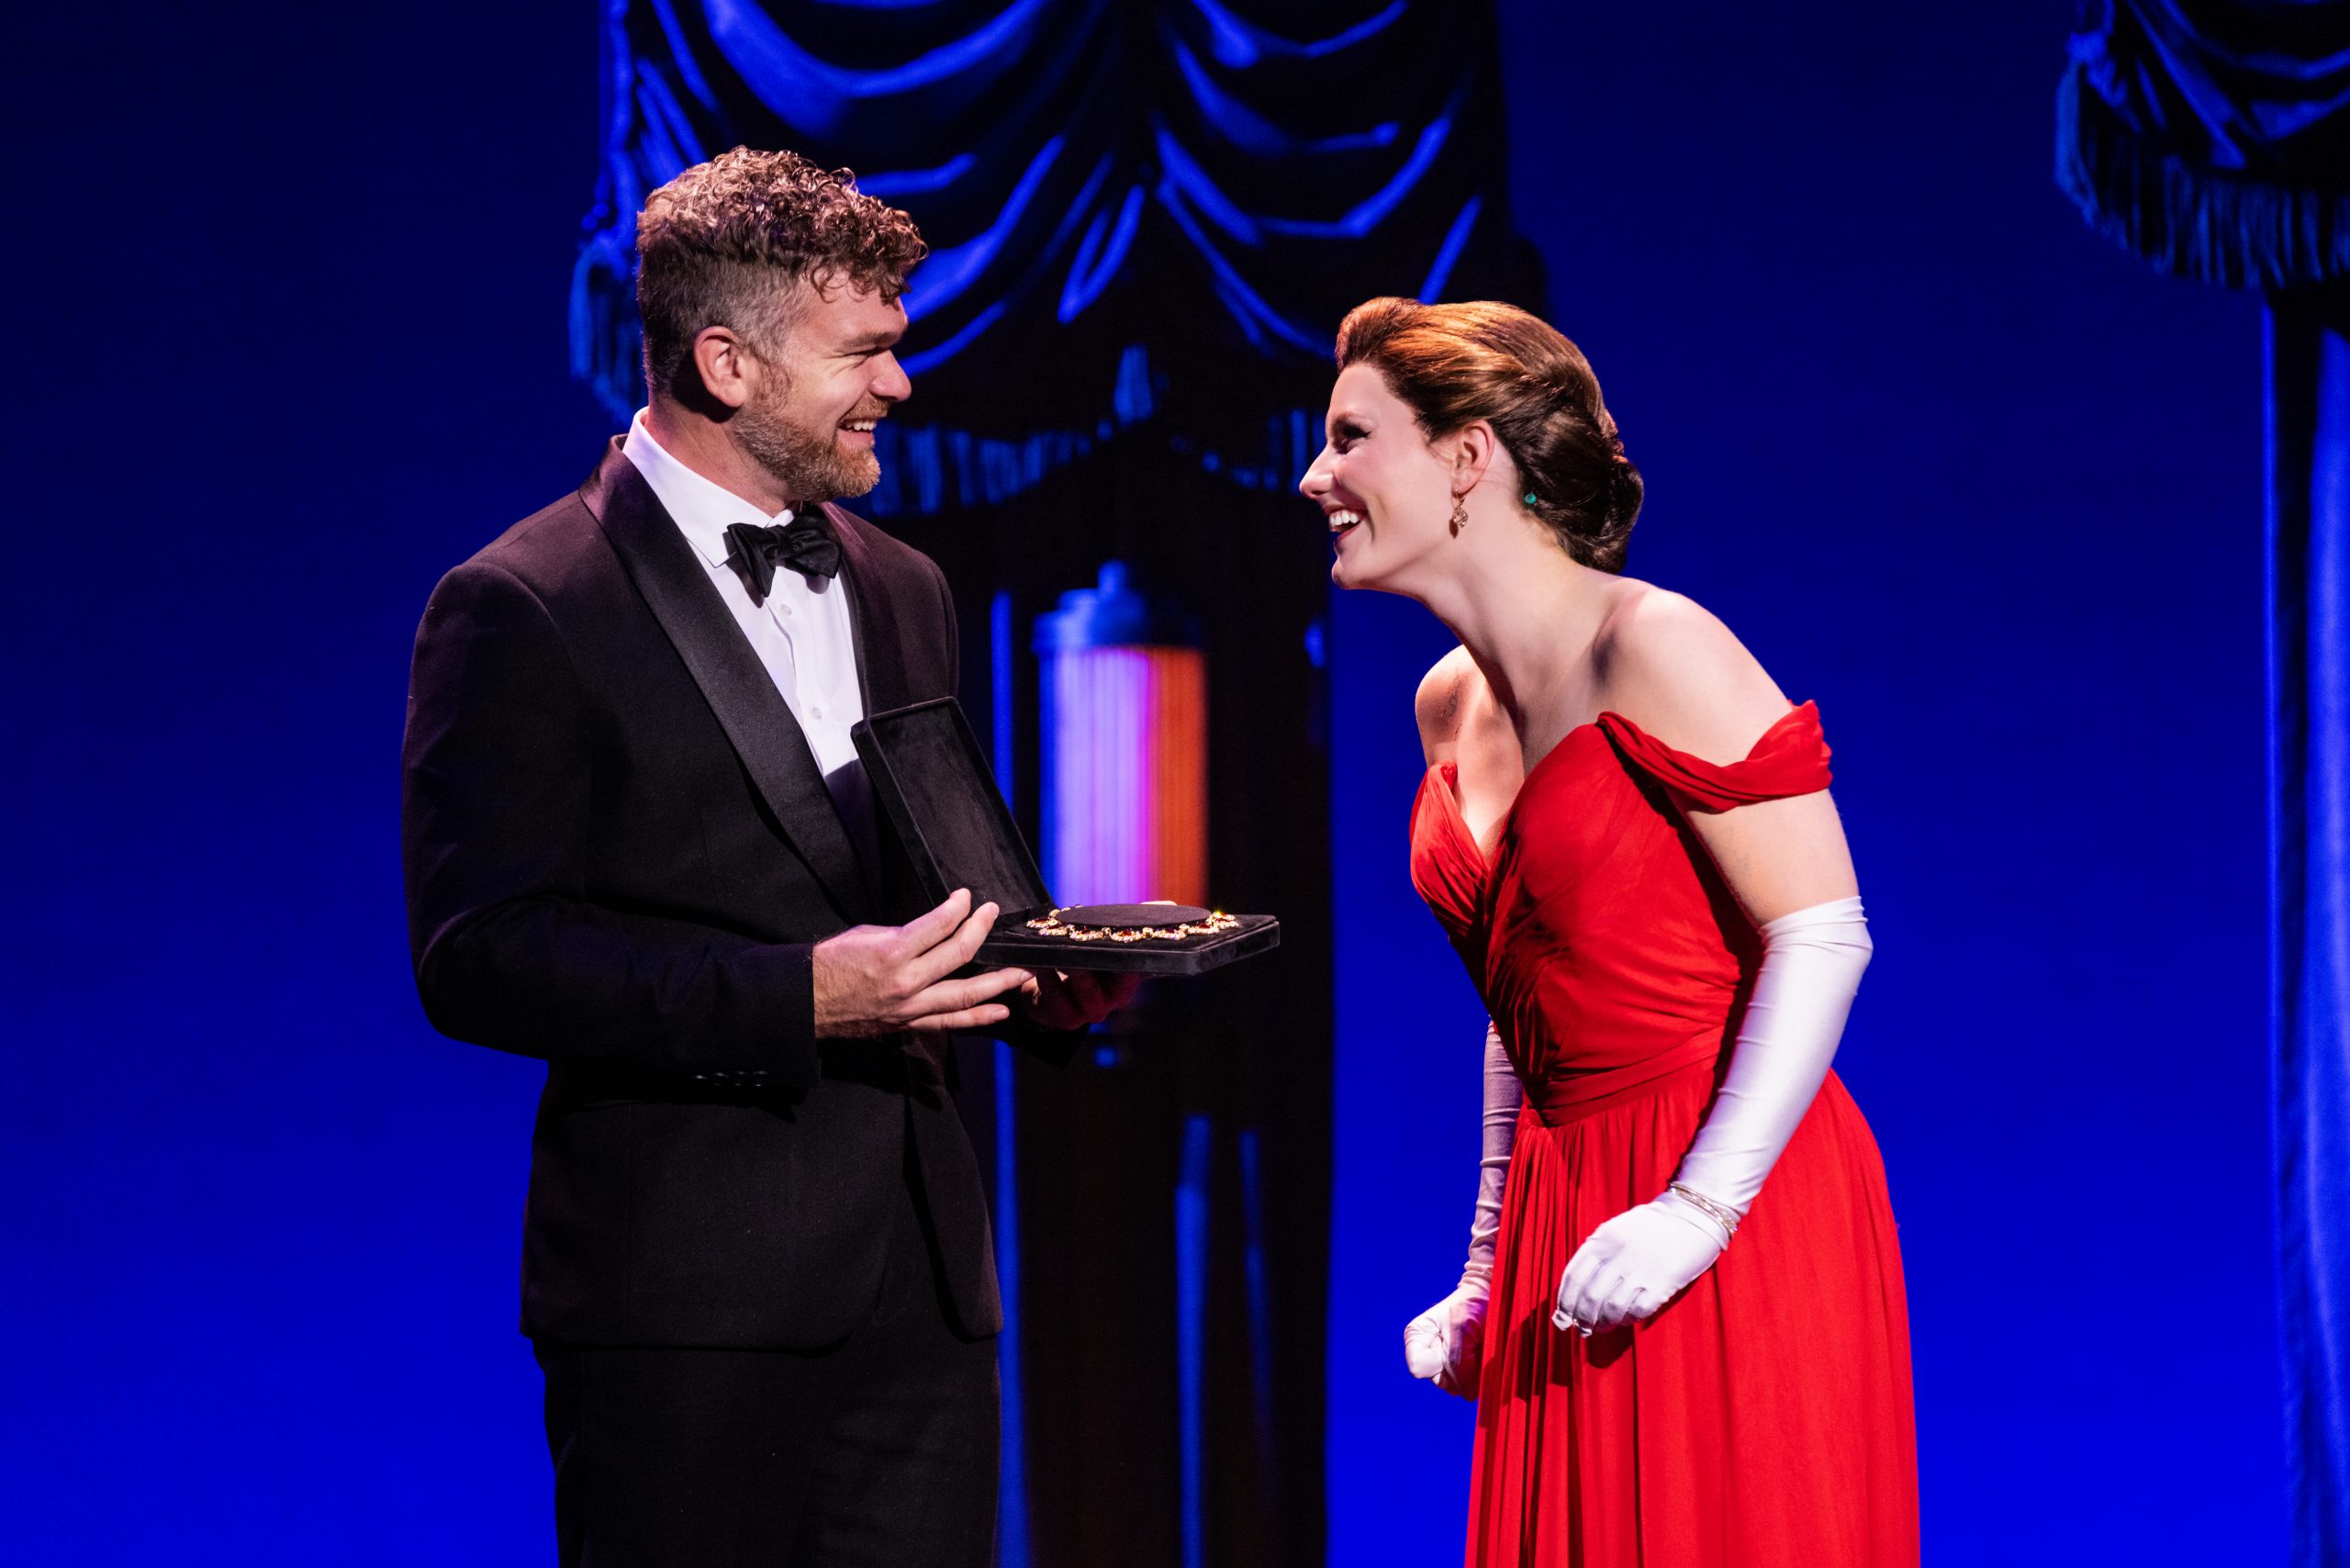 Pretty Woman: The Musical' lives up to iconic film